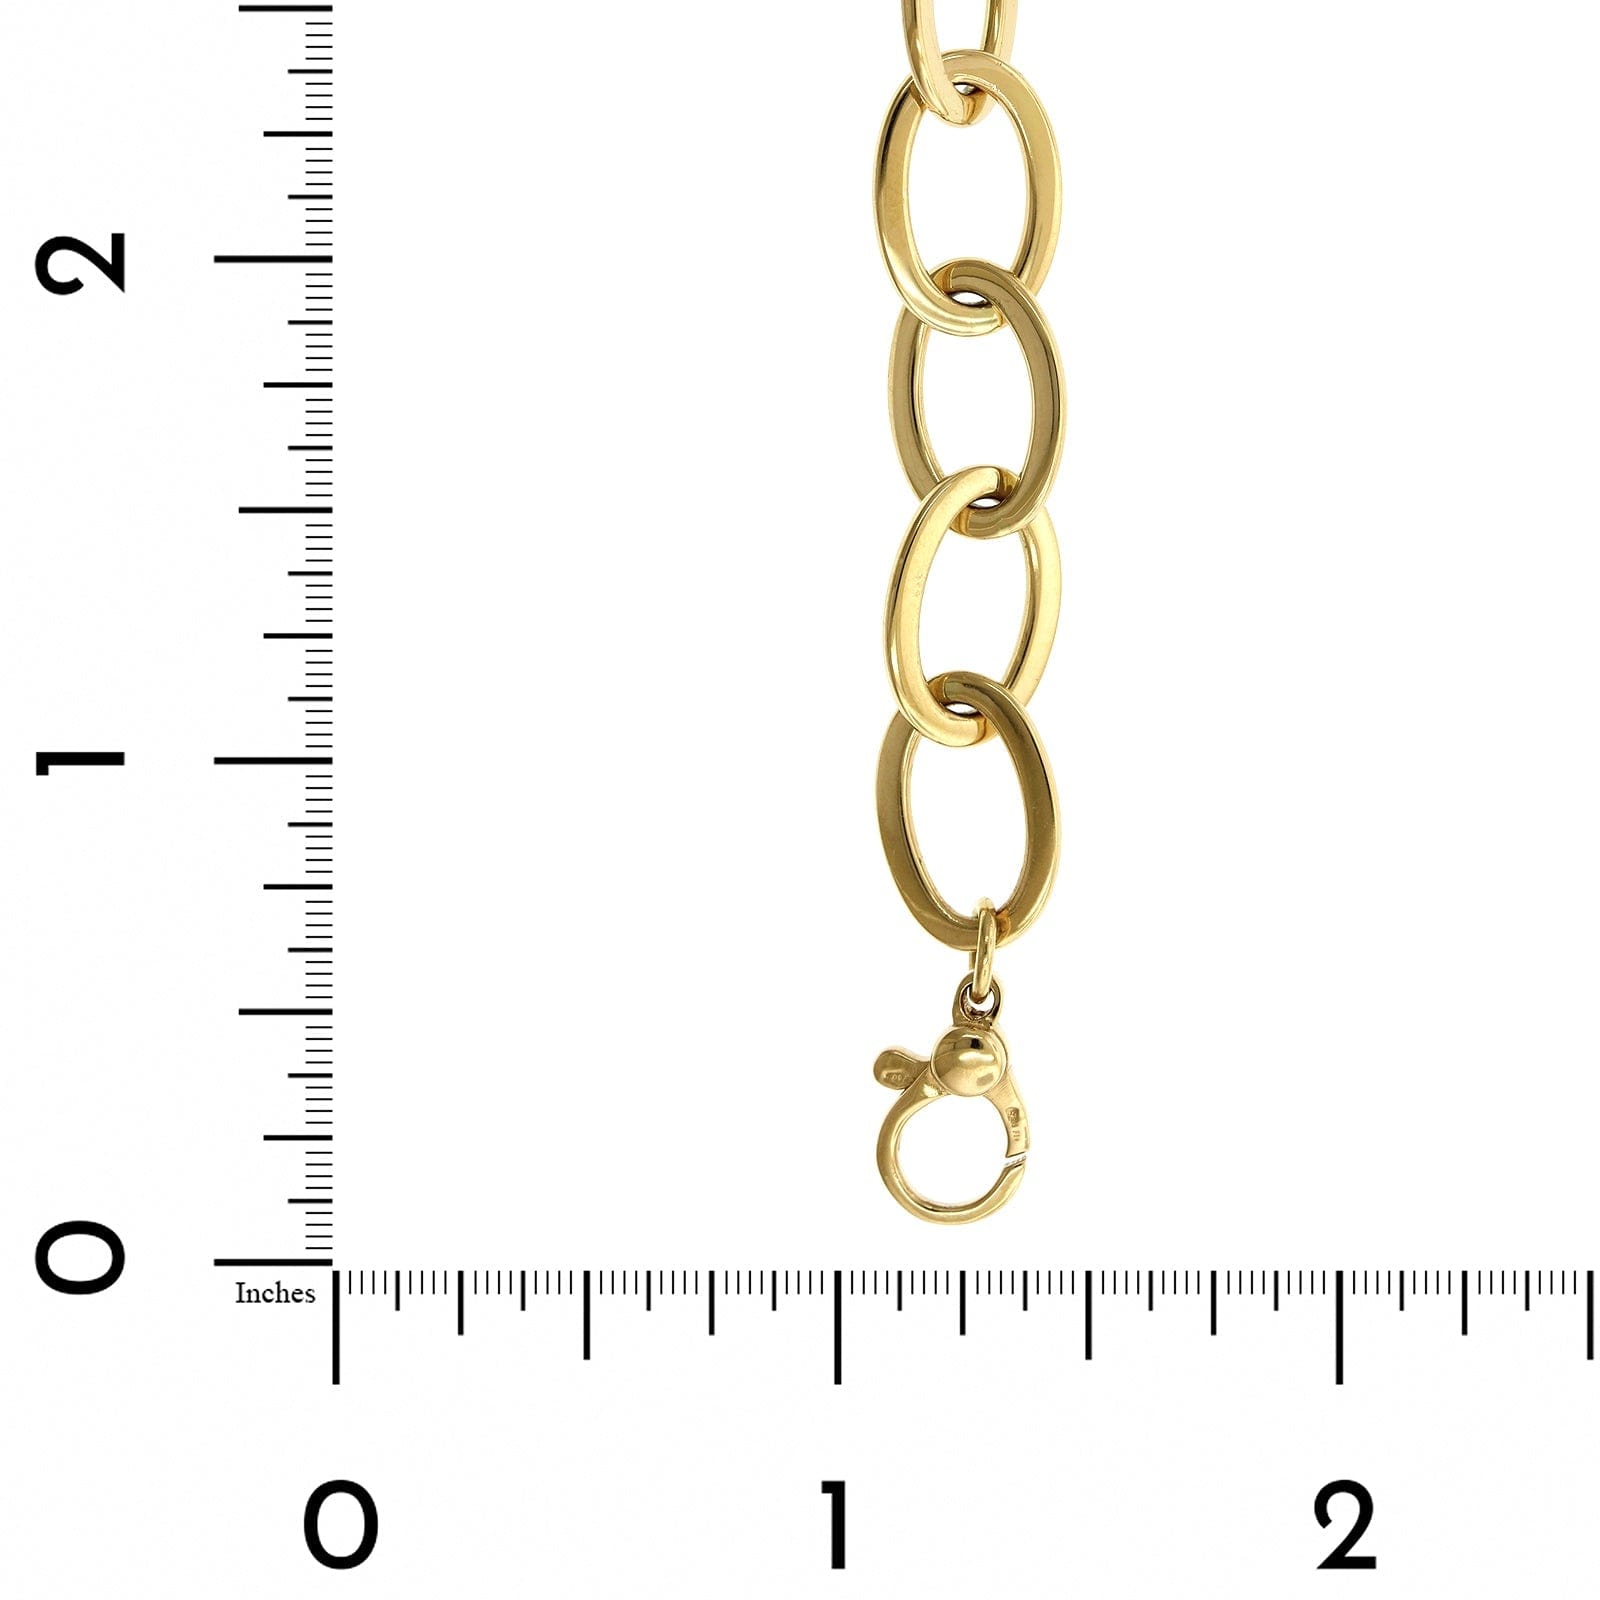 18K Yellow Gold Oval Link Bracelet, 18k yellow gold, Long's Jewelers